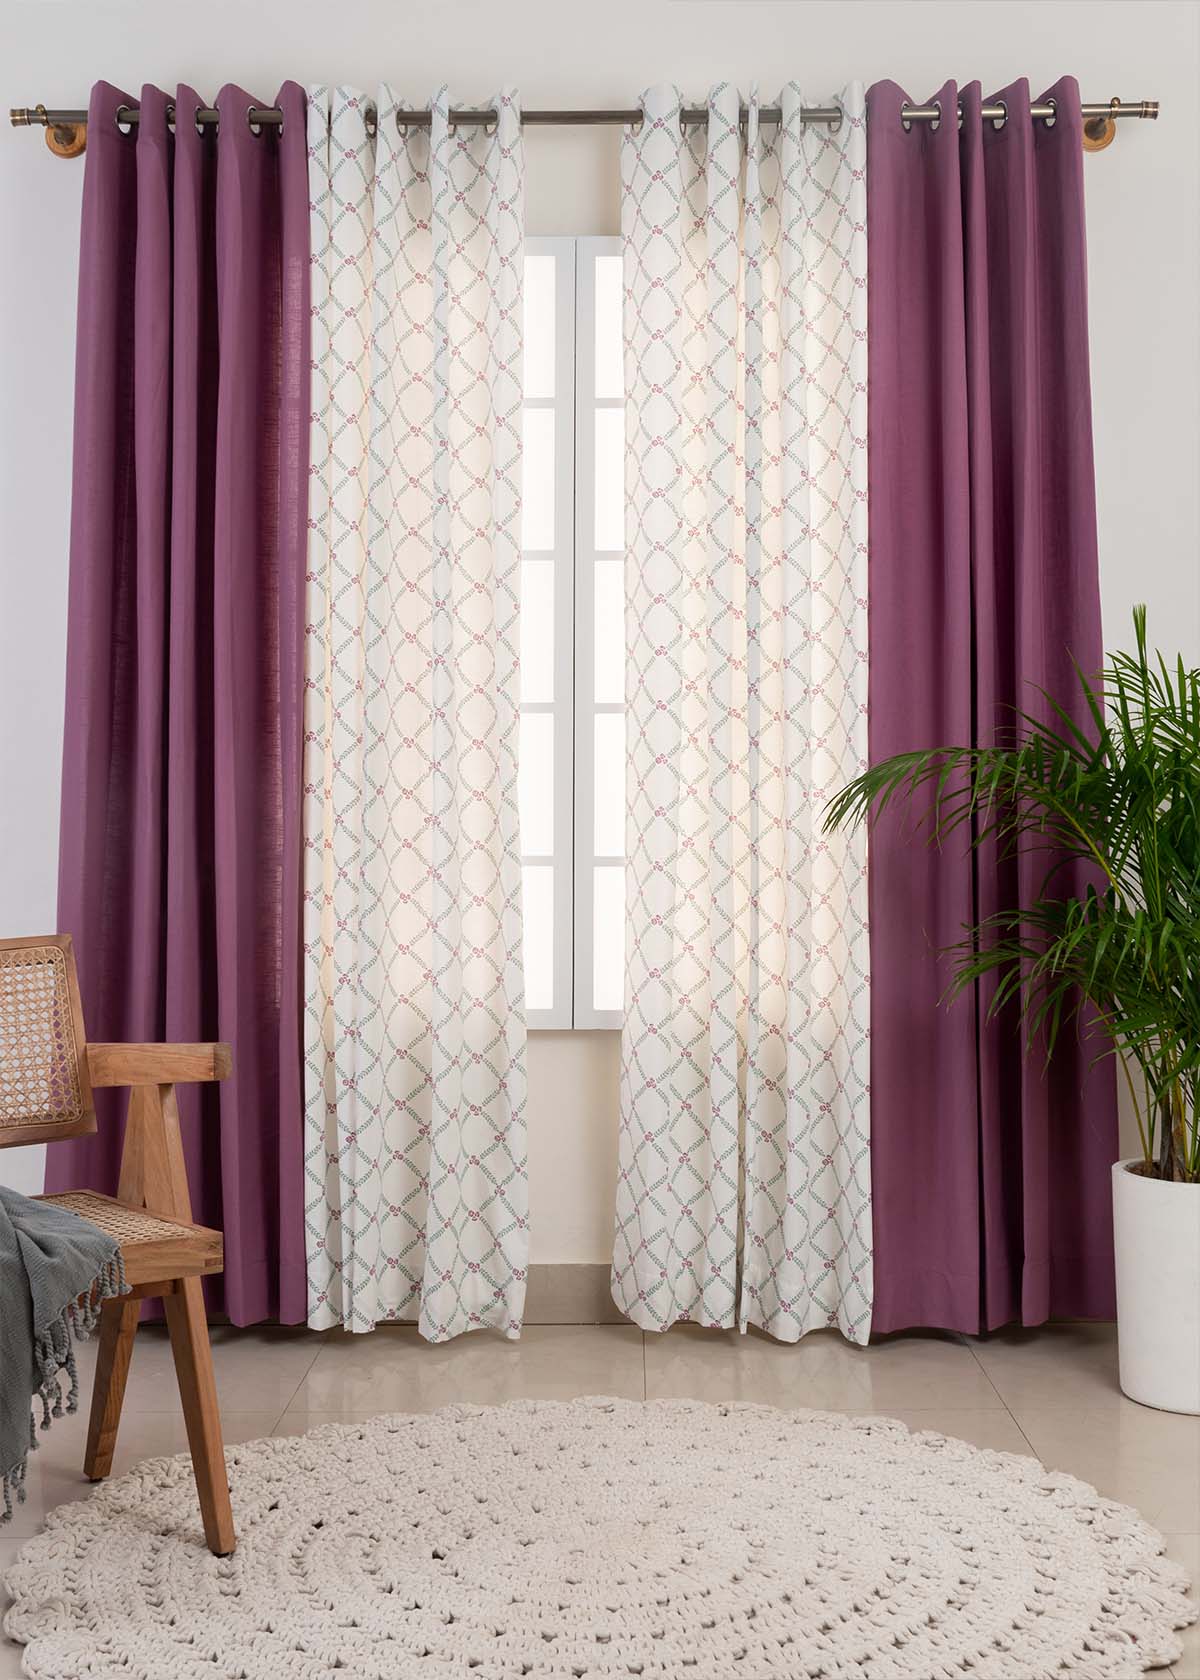 Grape Solid, Climbing Roses In Lavender Set Of 2 Combo Cotton Curtain - Grape Lavender